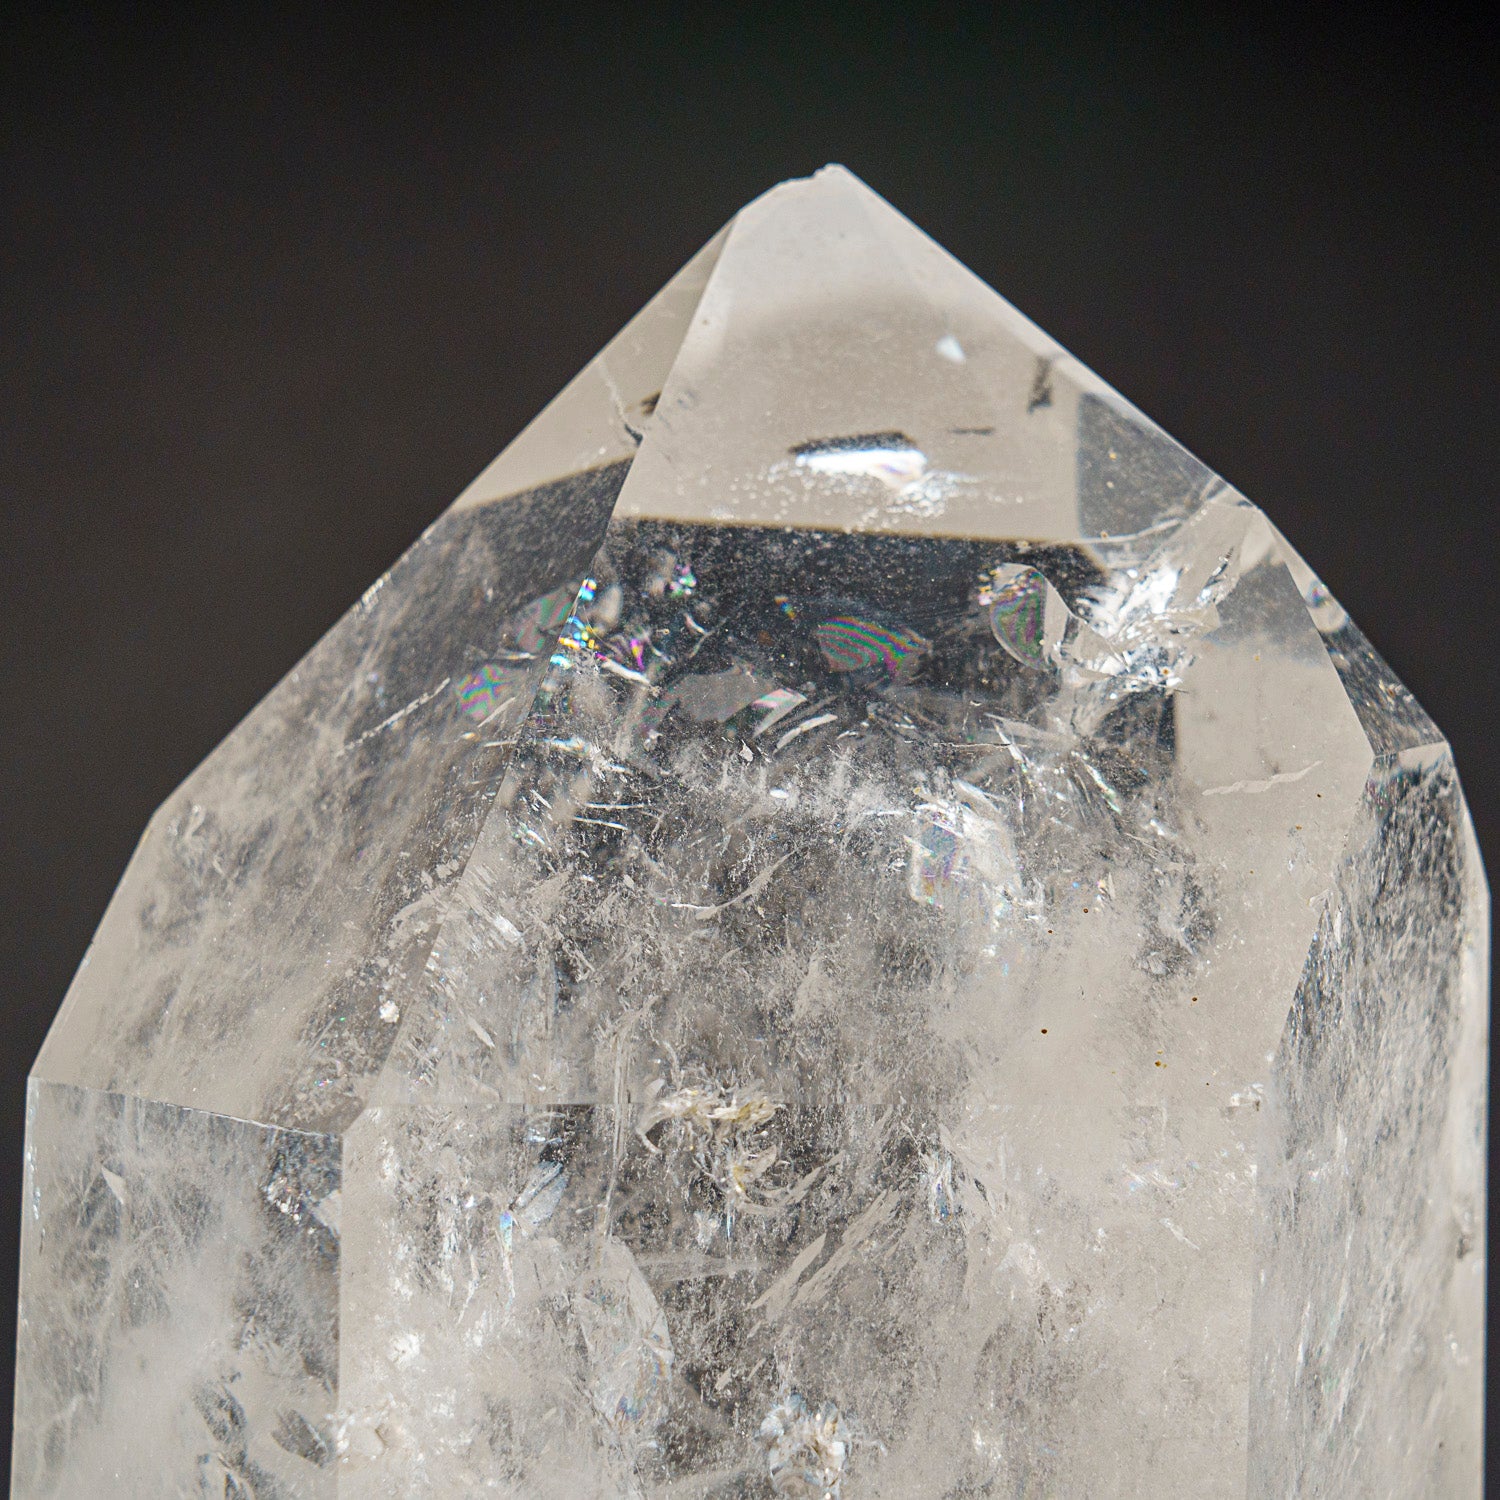 Genuine Polished Clear Quartz Point From Brazil (12.5 lbs)